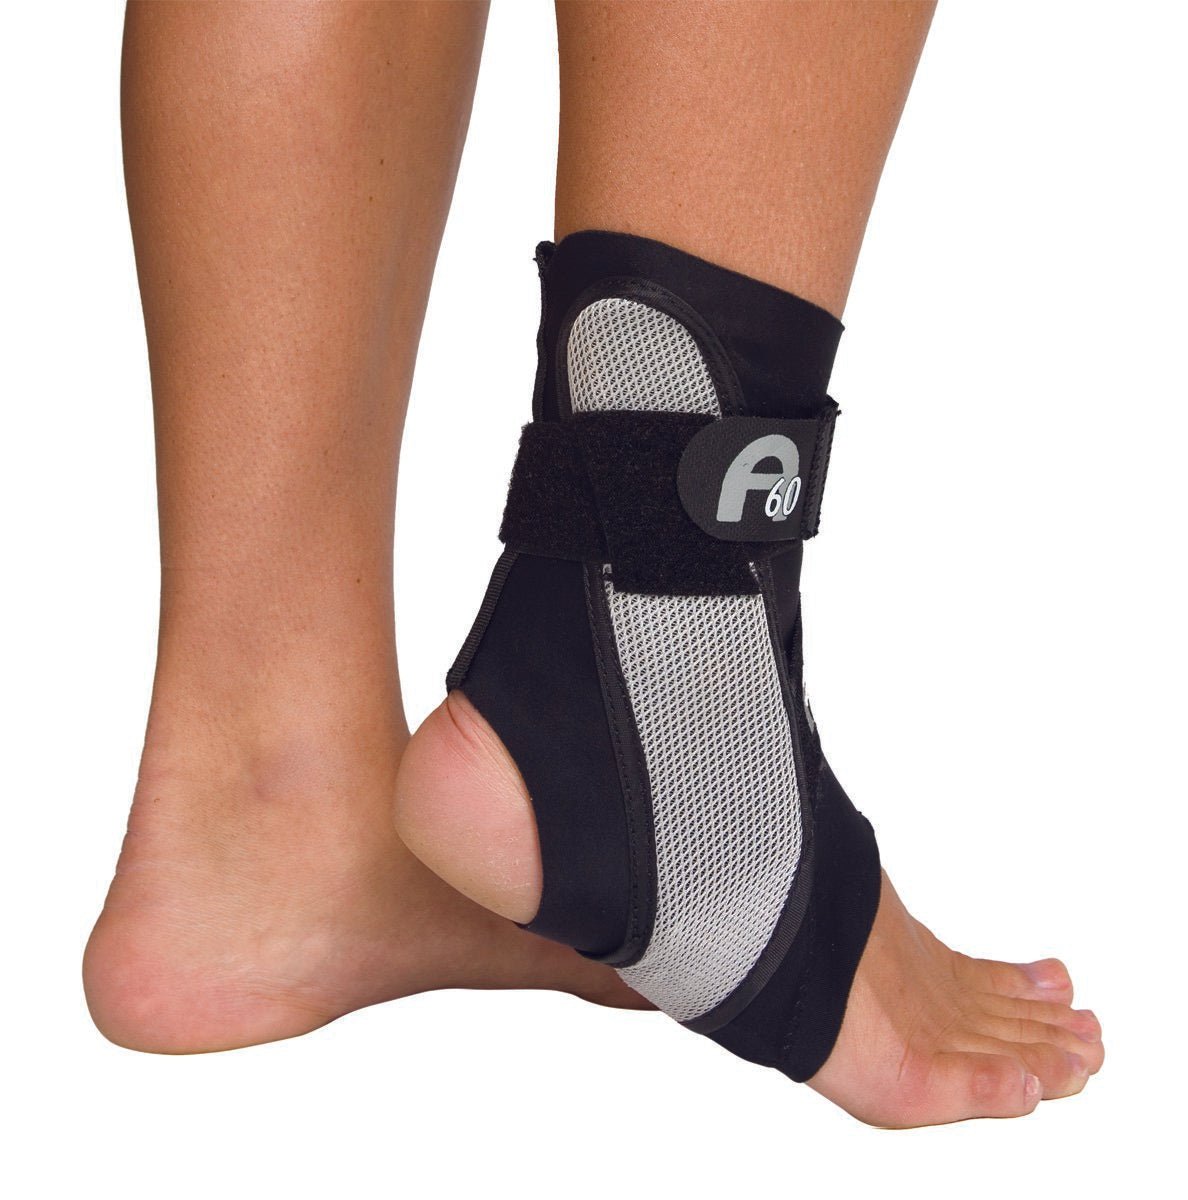 Aircast A60 Right Ankle Support - 565618_EA - 1